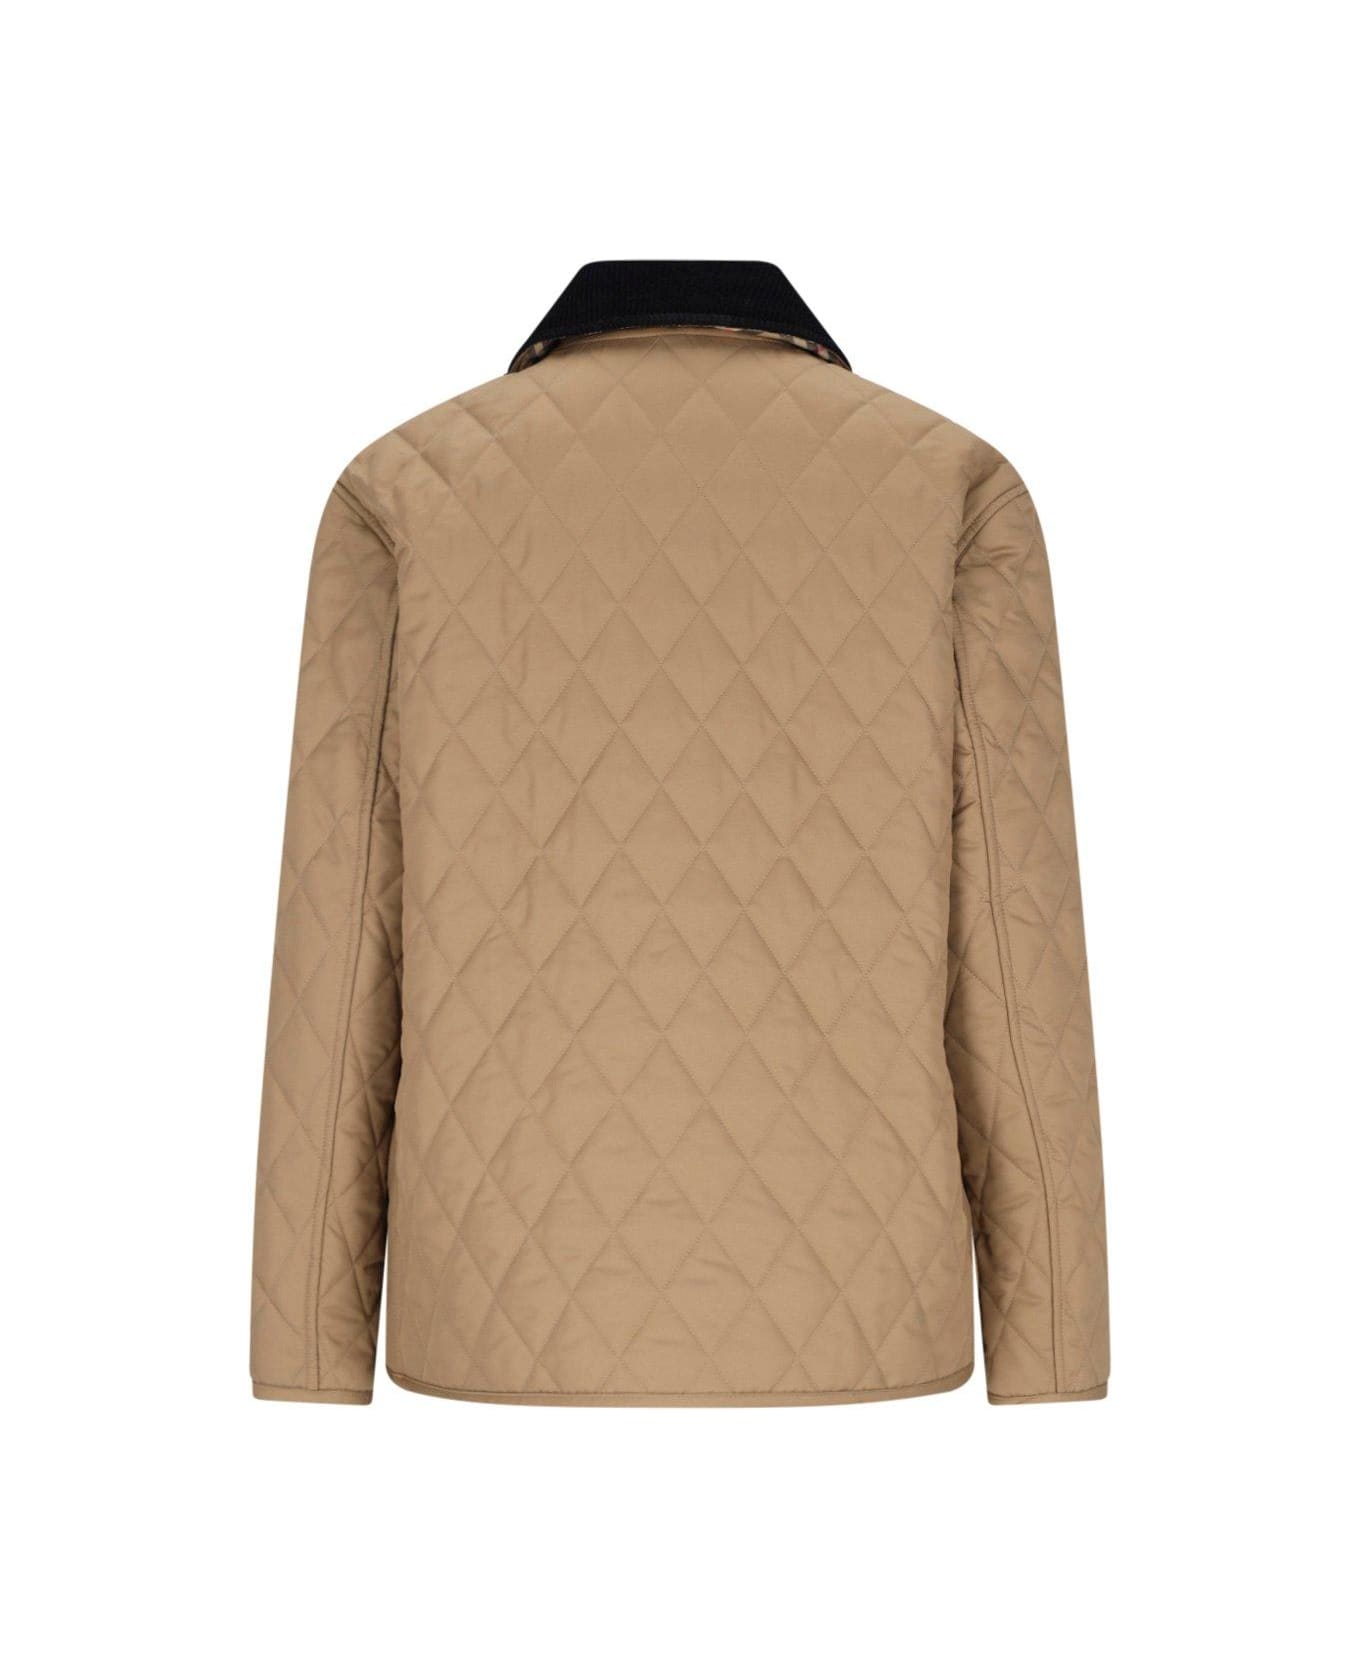 Burberry Long Sleeved Quilted Jacket - Camel ダウンジャケット